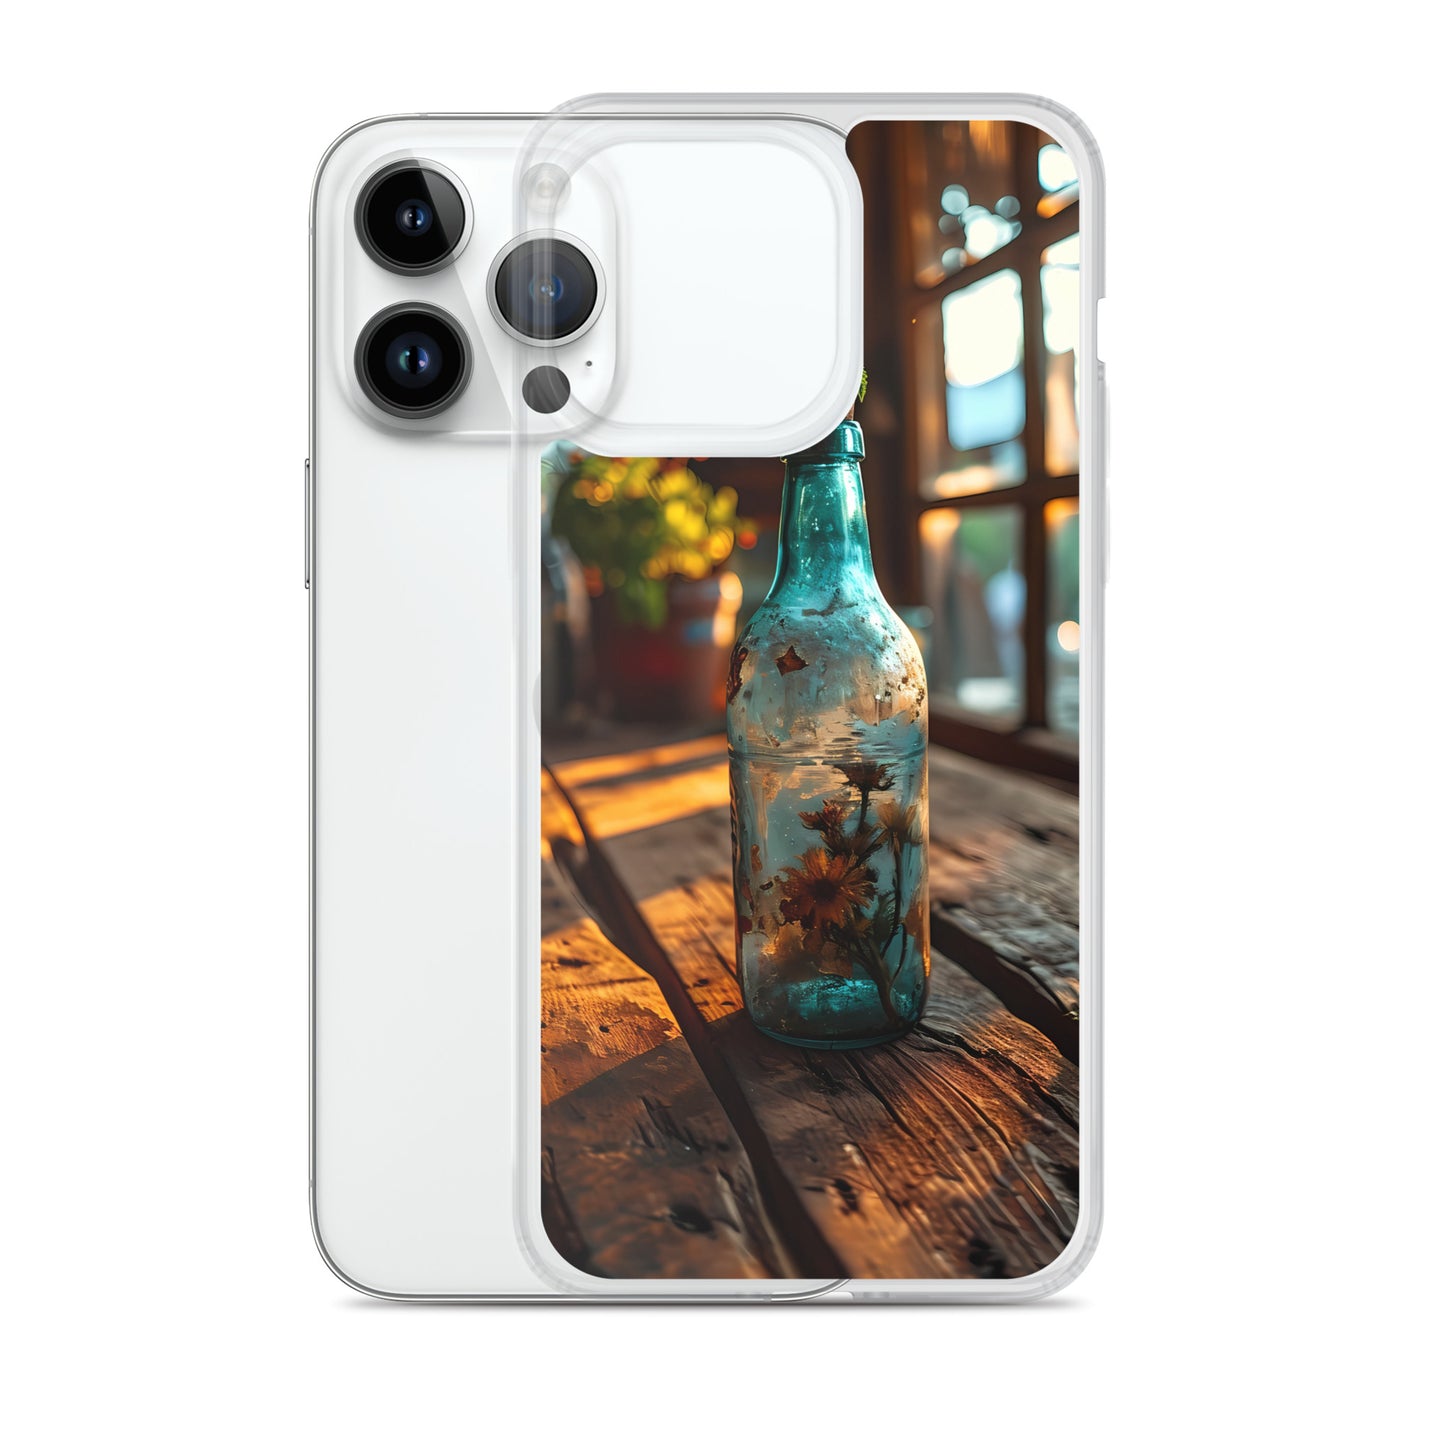 iPhone Case - Universe in a Bottle #6